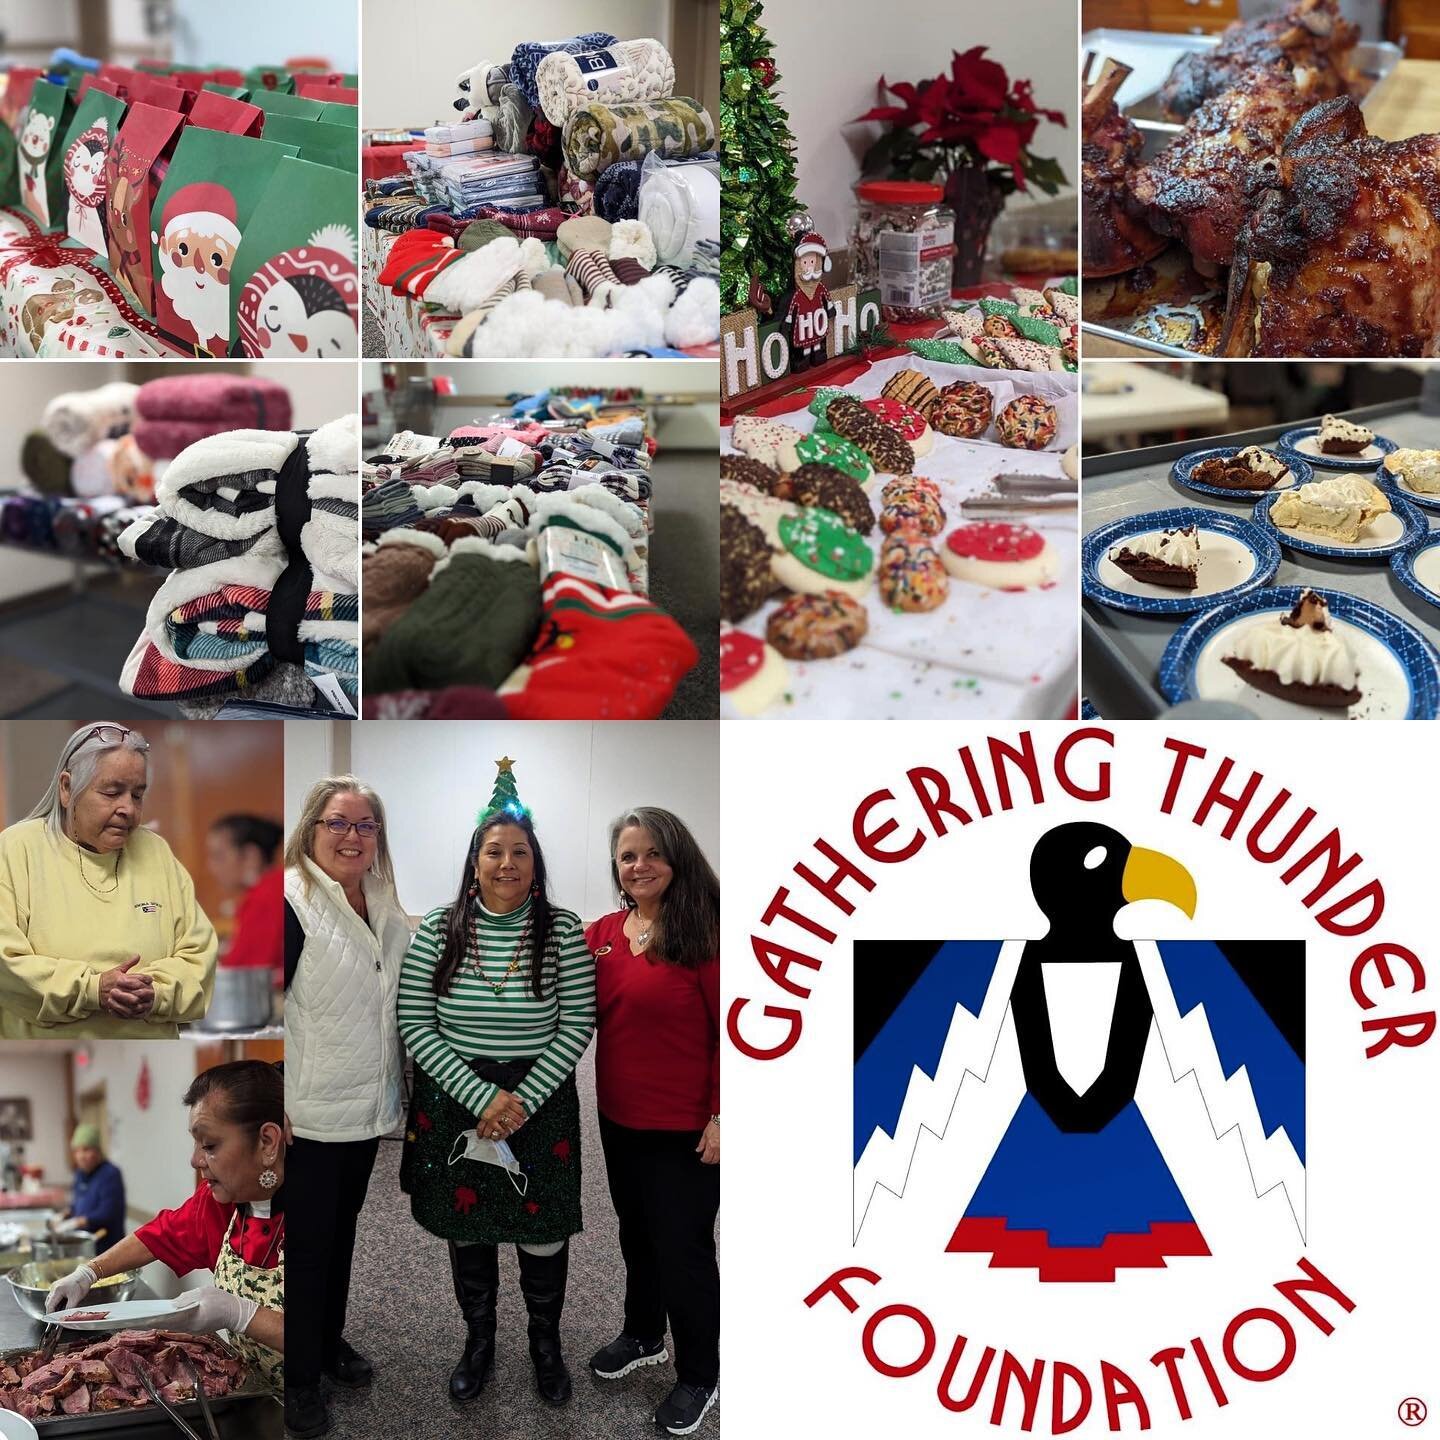 Gathering Thunder Foundation is honored to have been a sponsor of the #pawatingmegedwinkikajiik winter celebration gathering in Grand Rapids, MI.  It was a great event with delicious foods, fun giveaways, and beautiful elders.  #gatheringthunderfound